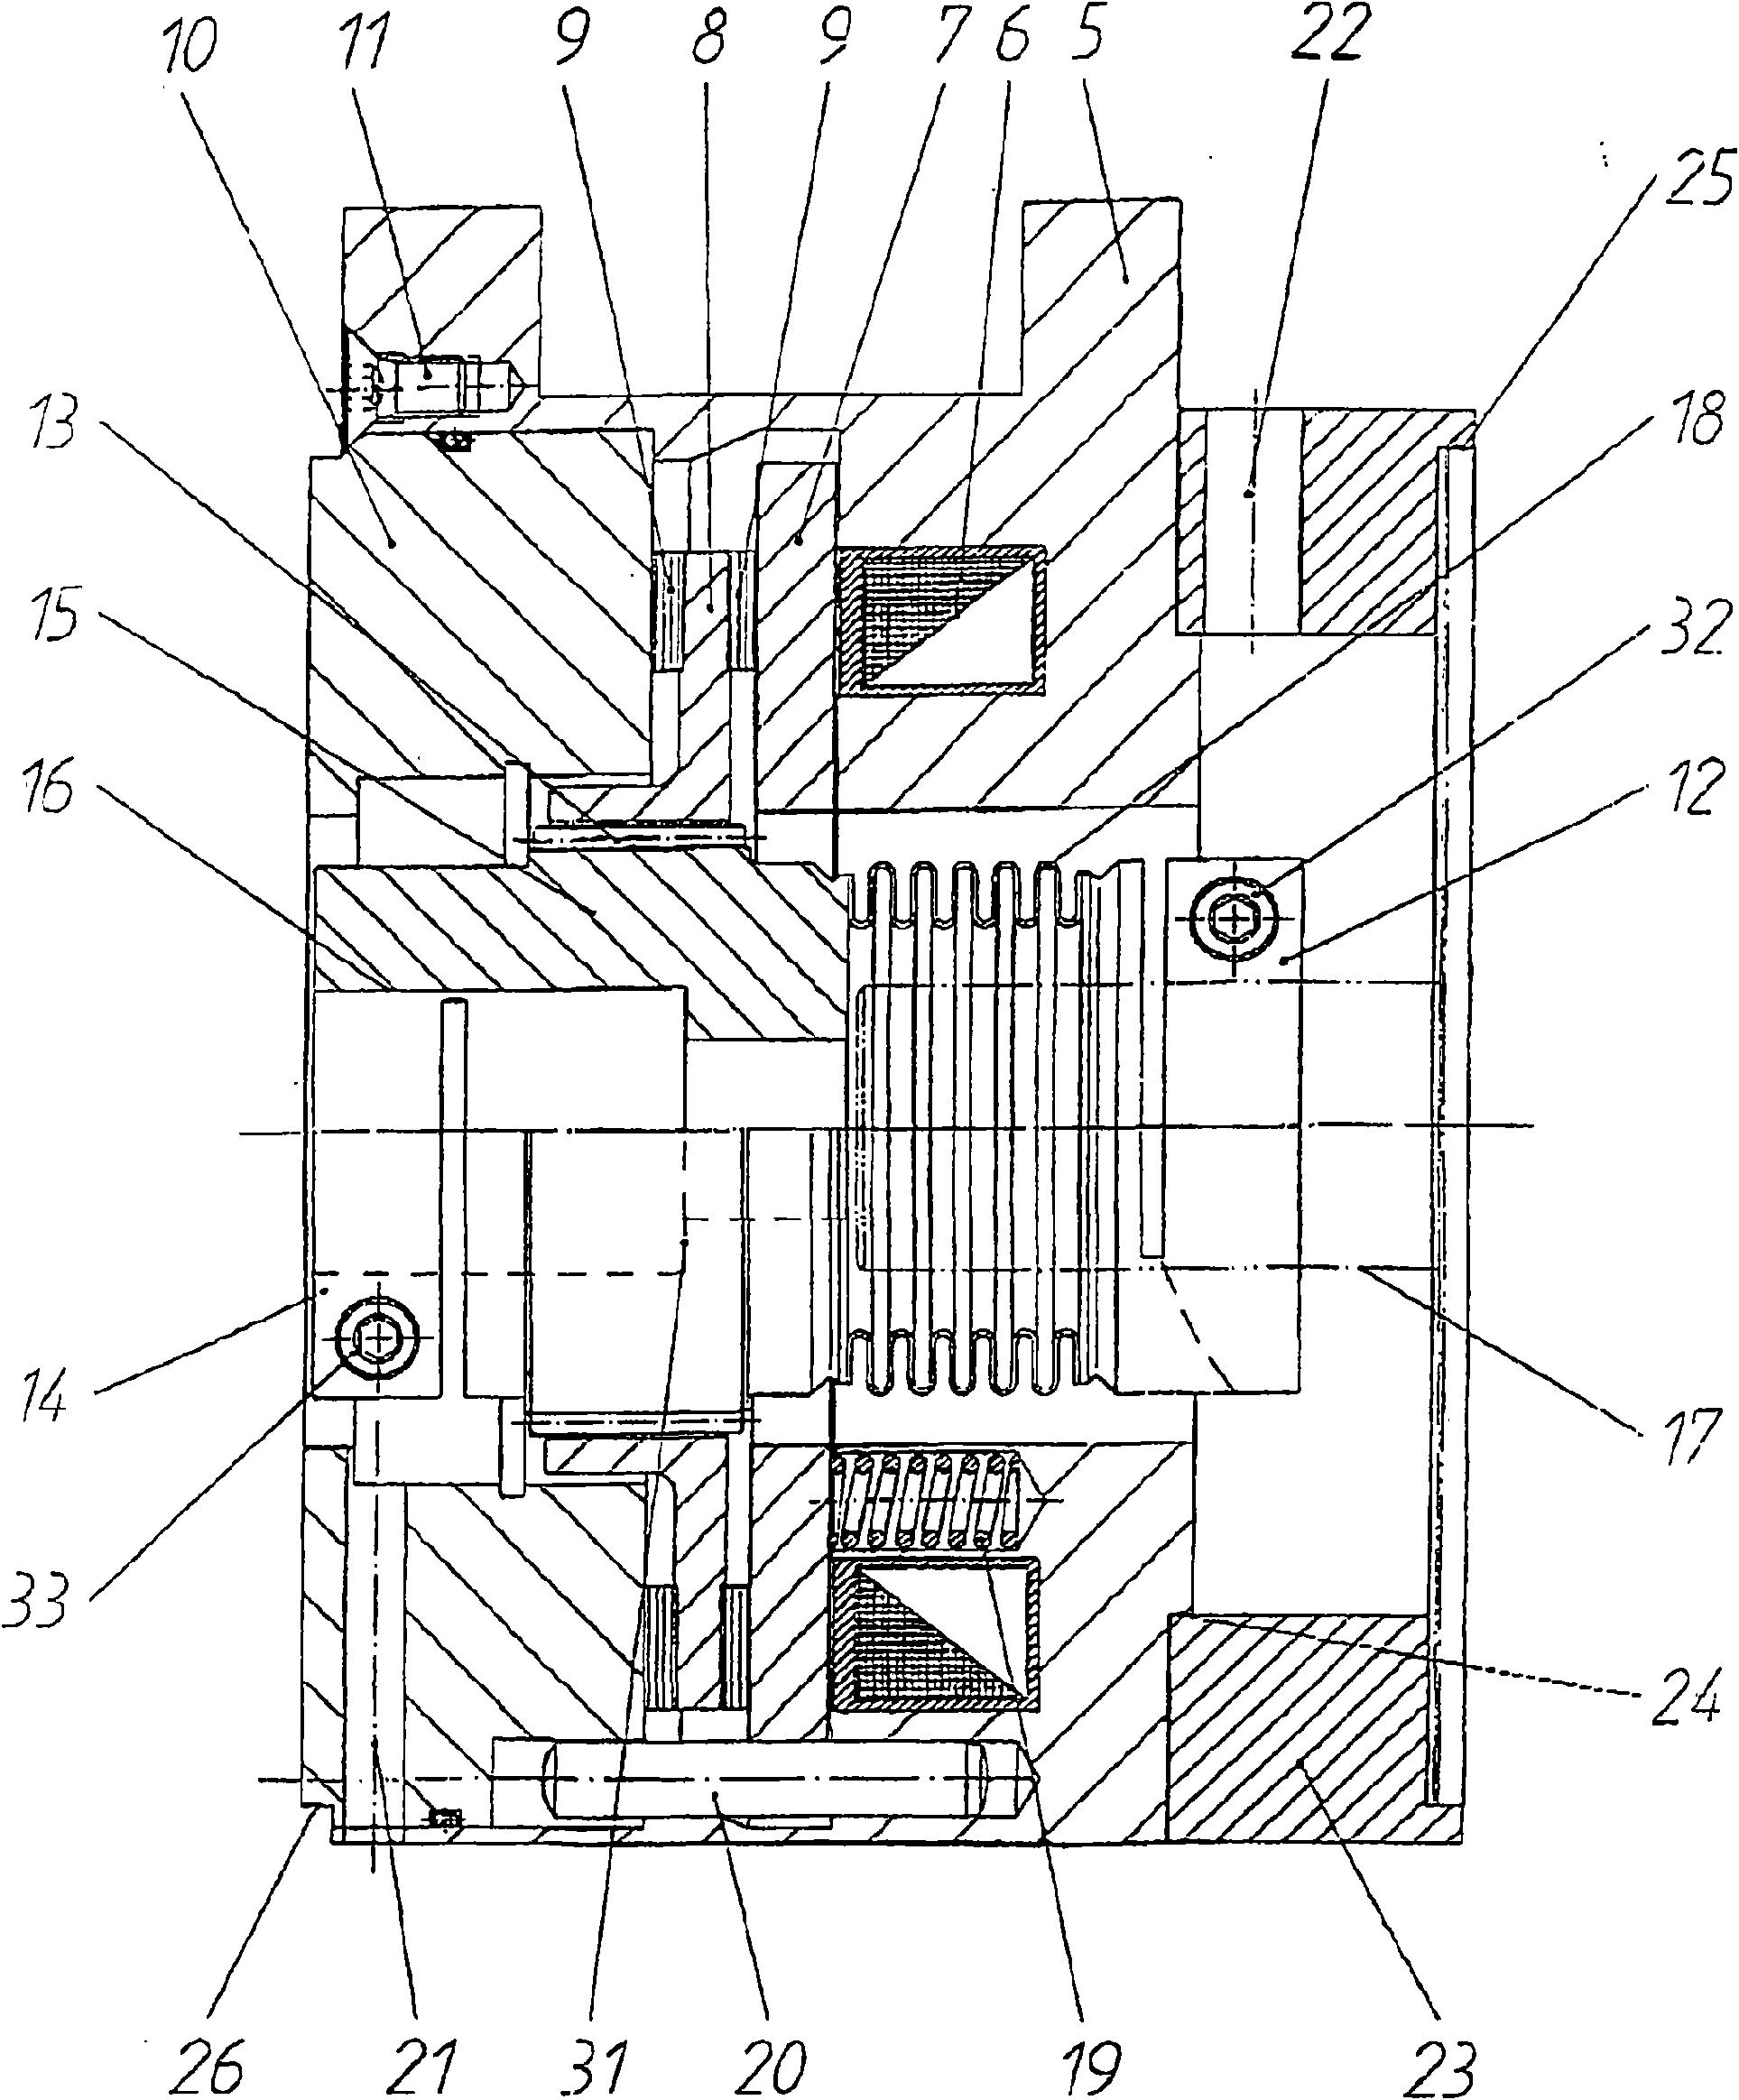 Drive-driven-unit with coupling/brake combination